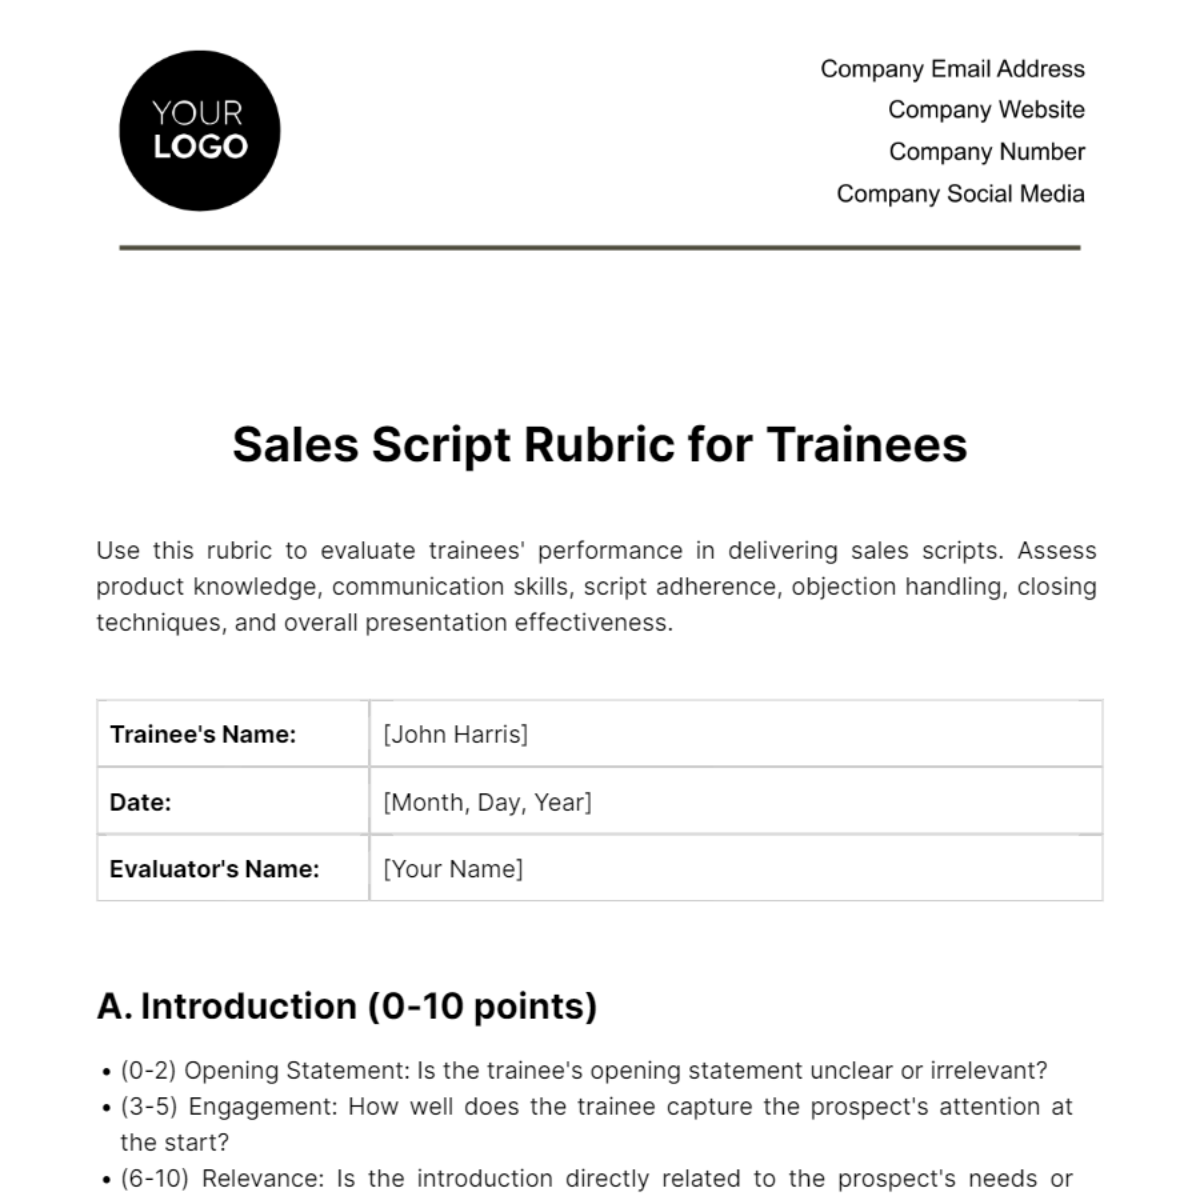 Free Sales Script Rubric for Trainees Template